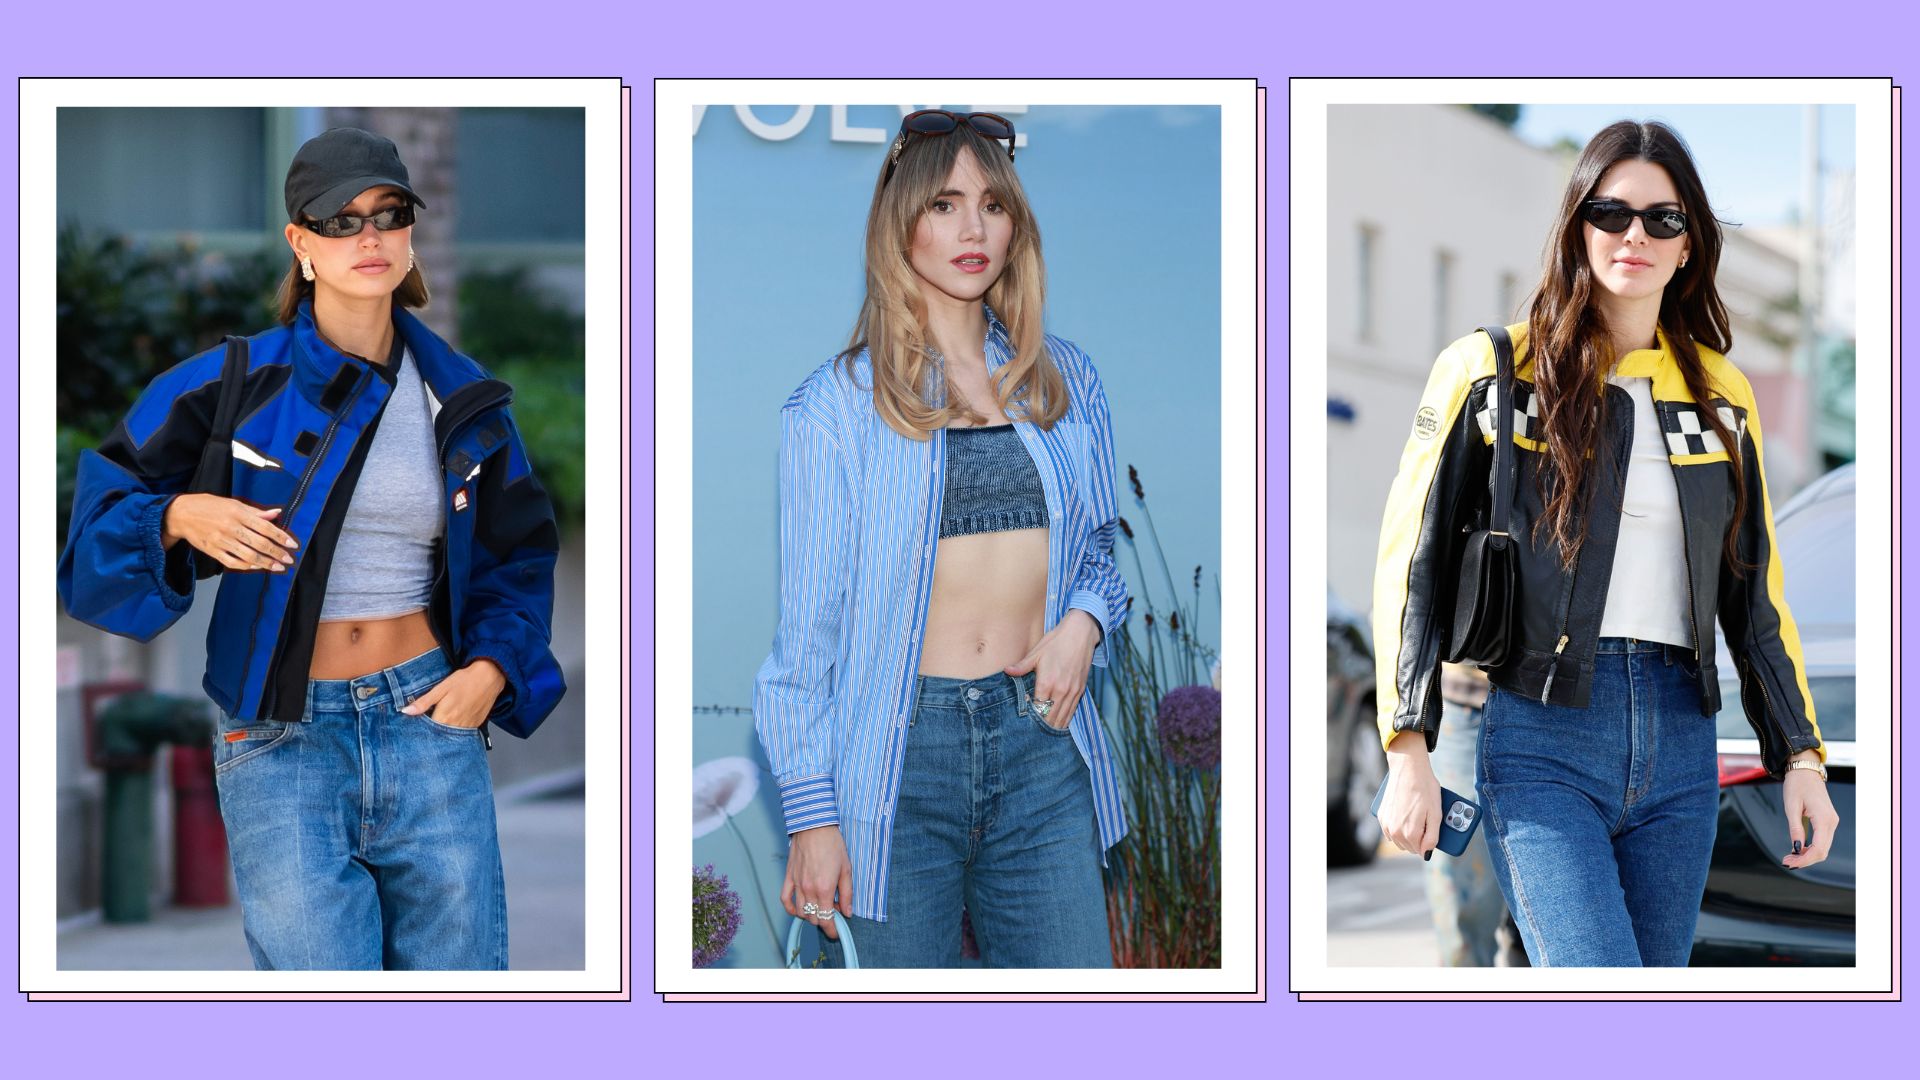 Kendall Jenner and Hailey Bieber Paired Bra Tops and Leather Jackets  Together